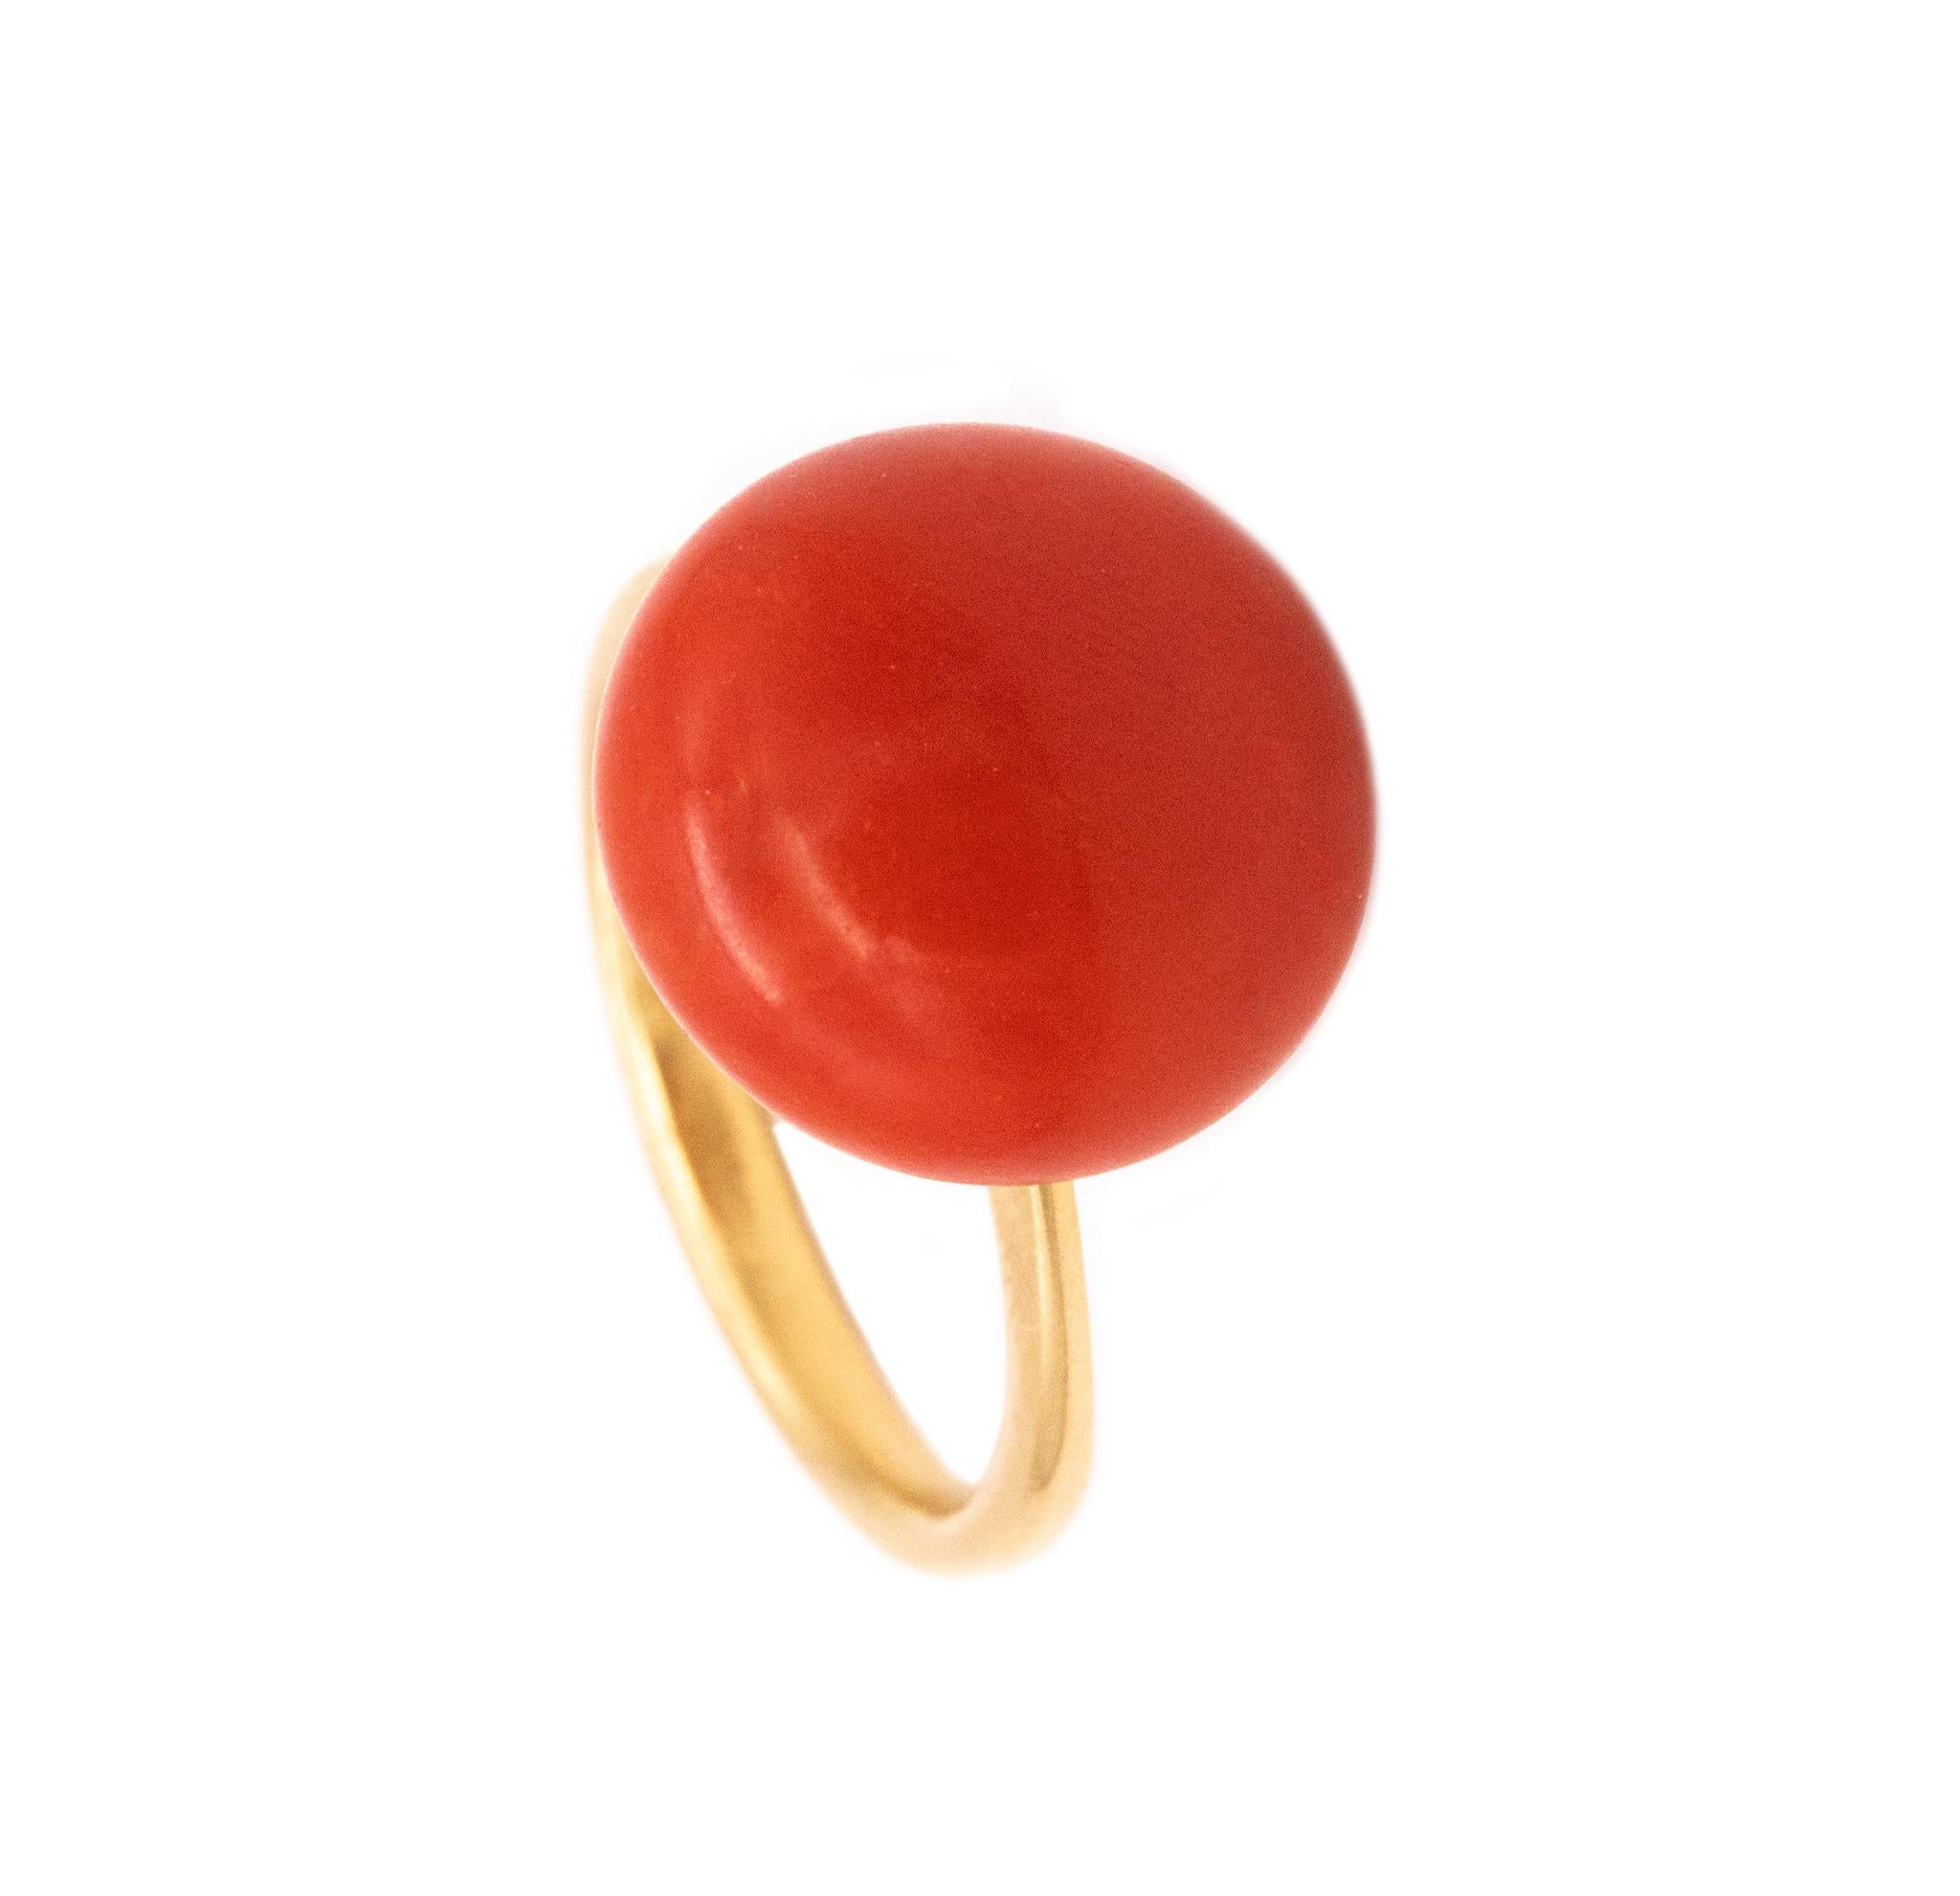 Solitaire cocktail ring with Sardinian Red Coral.

A vintage Italian ring from the mid-century period, circa 1950's. The mounting is crafted in solid 18 karats yellow gold and embellished on top, with a single round cabochon cut (14.5 x 9 mm) of a